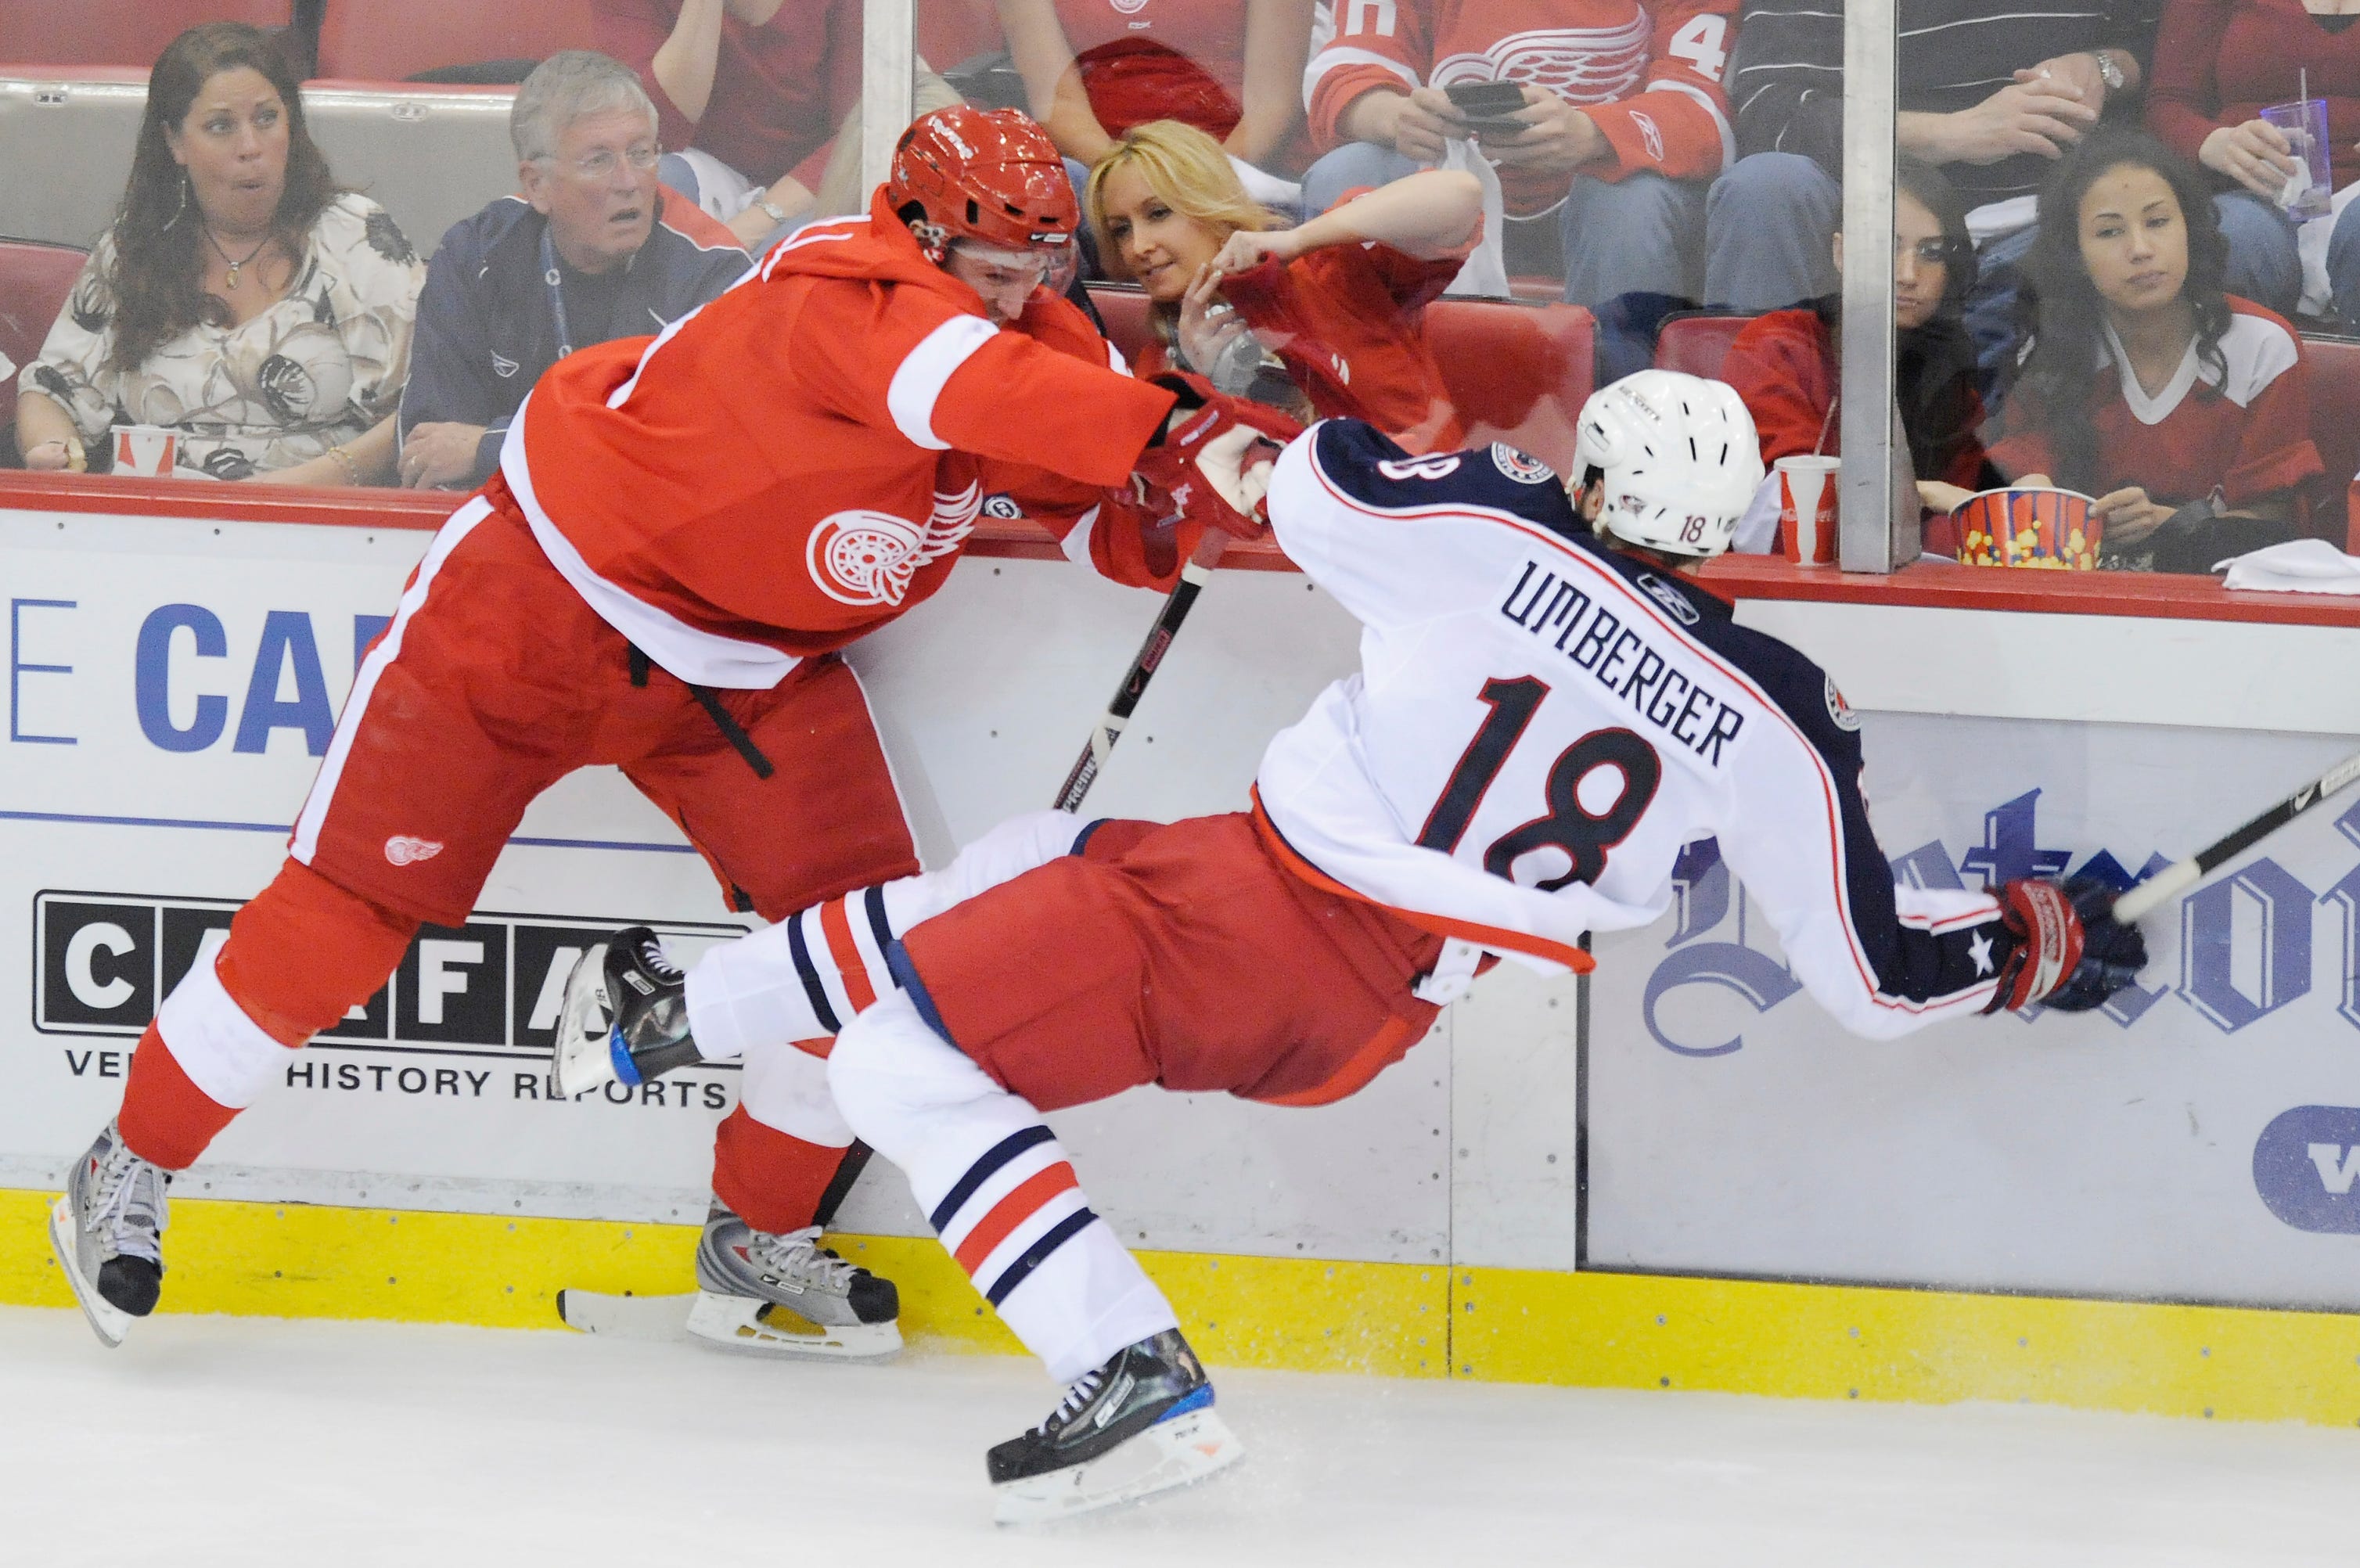 Detroit Red Wings defenseman Niklas Kronwall checks Columbus Blue Jackets center R.J. Umberger, knocking him backward during a 4-0 victory in Game 2 of their Eastern Conference playoff series on Saturday, April 18, 2009.